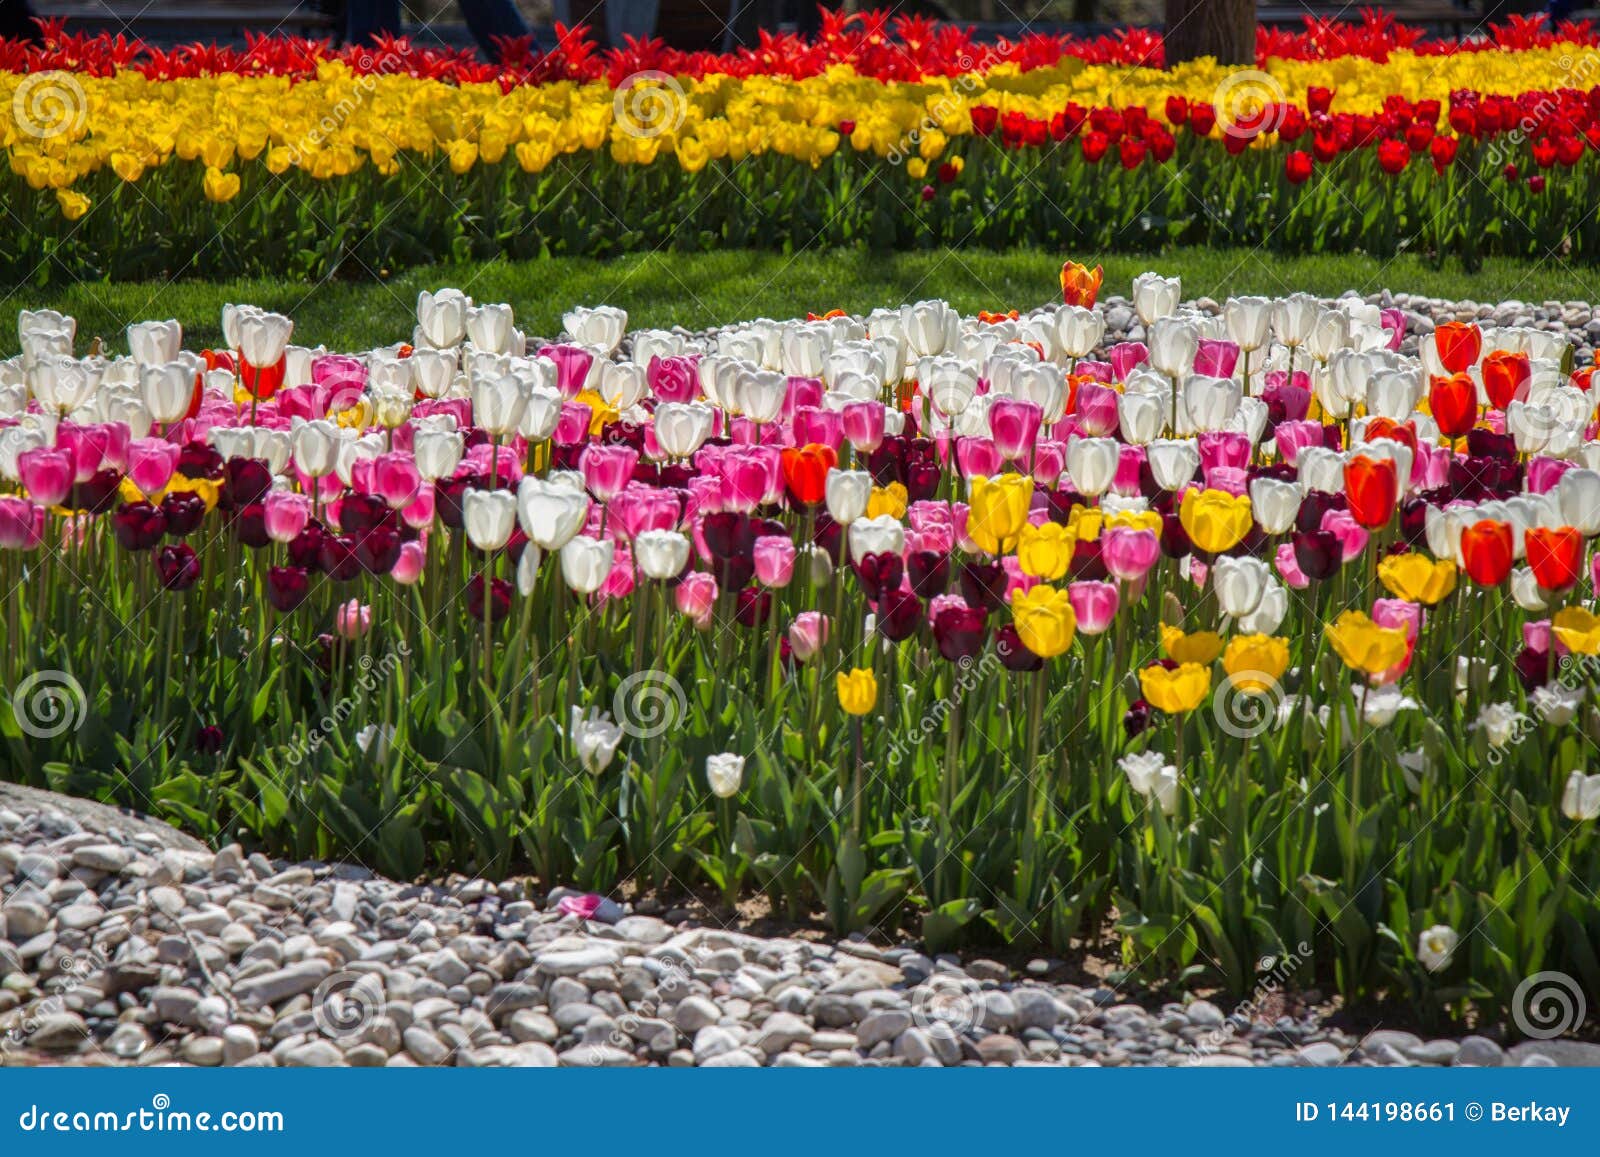 Various Color Tulip Flowers in the Garden Stock Image - Image of ...